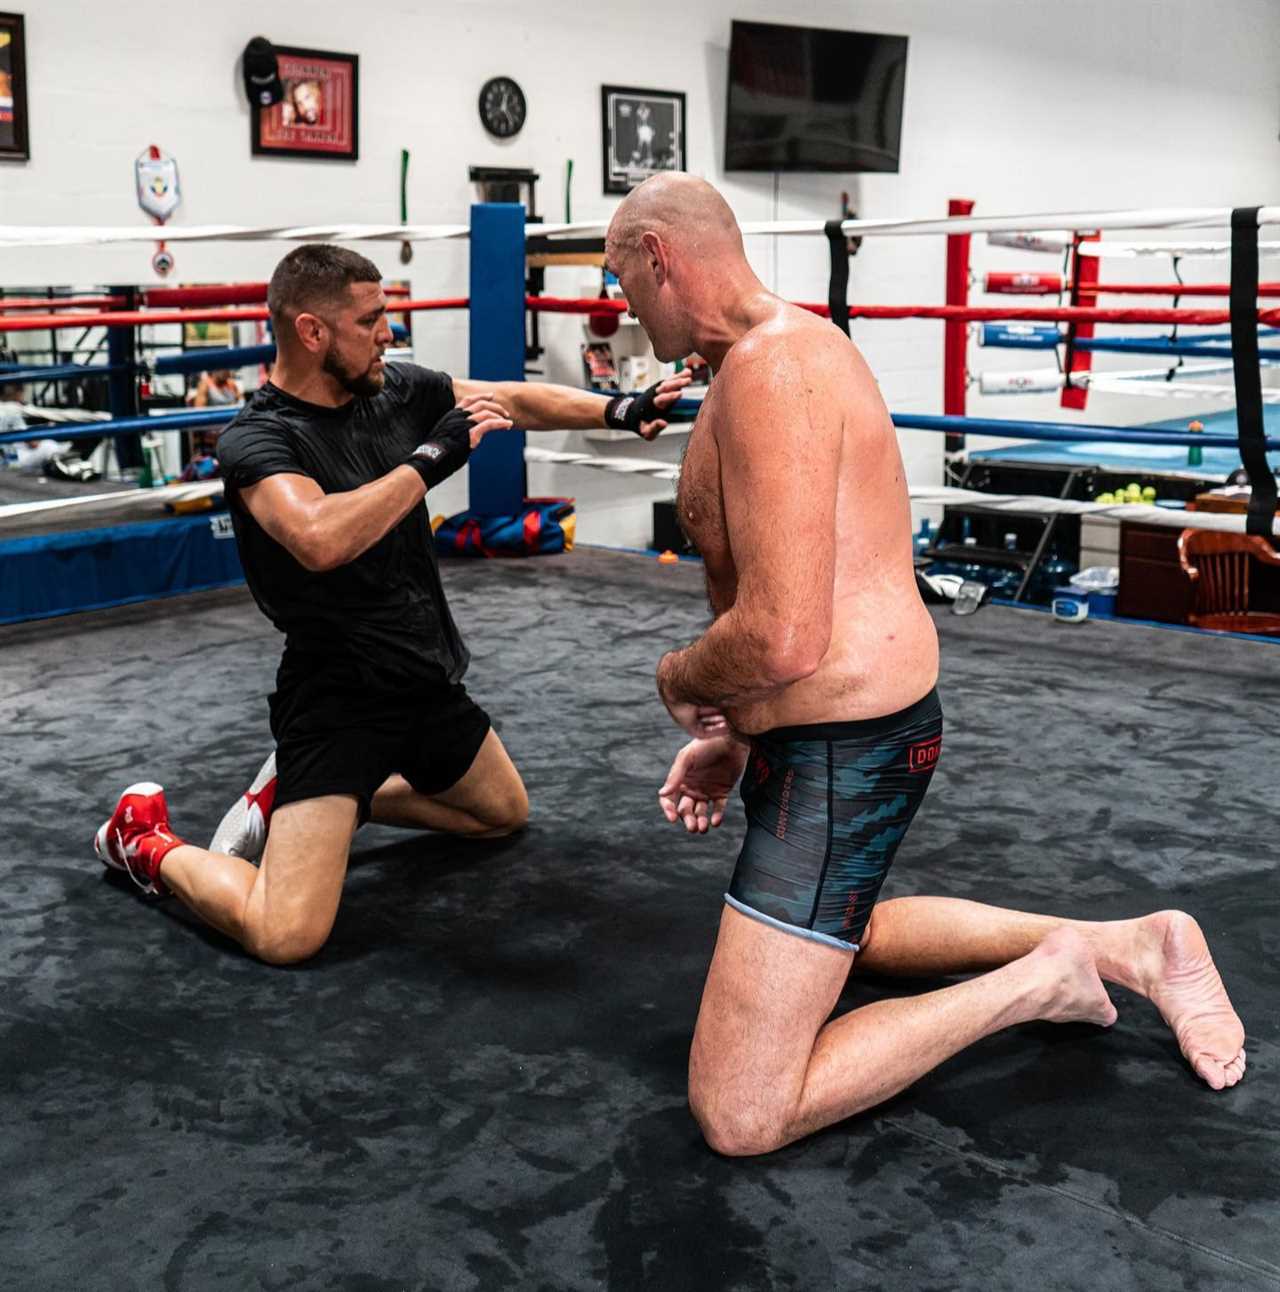 After hinting at MMA switching in throwback snaps, Tyson Fury trains alongside UFC star Nick Diaz.